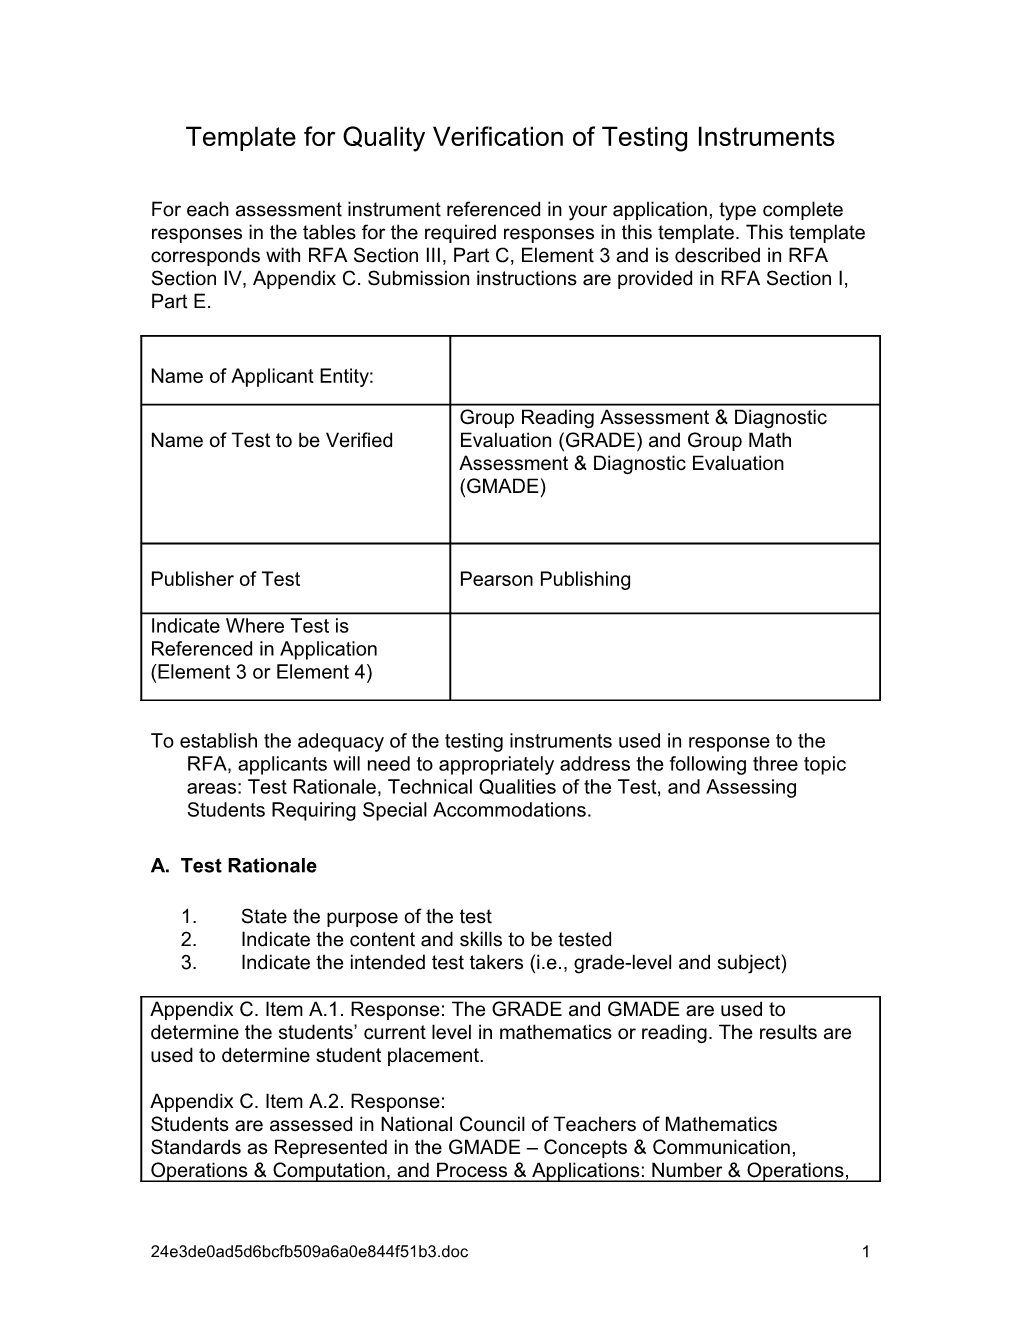 Form2-09: Supplemental Educational Services (CA Dept. of Education)